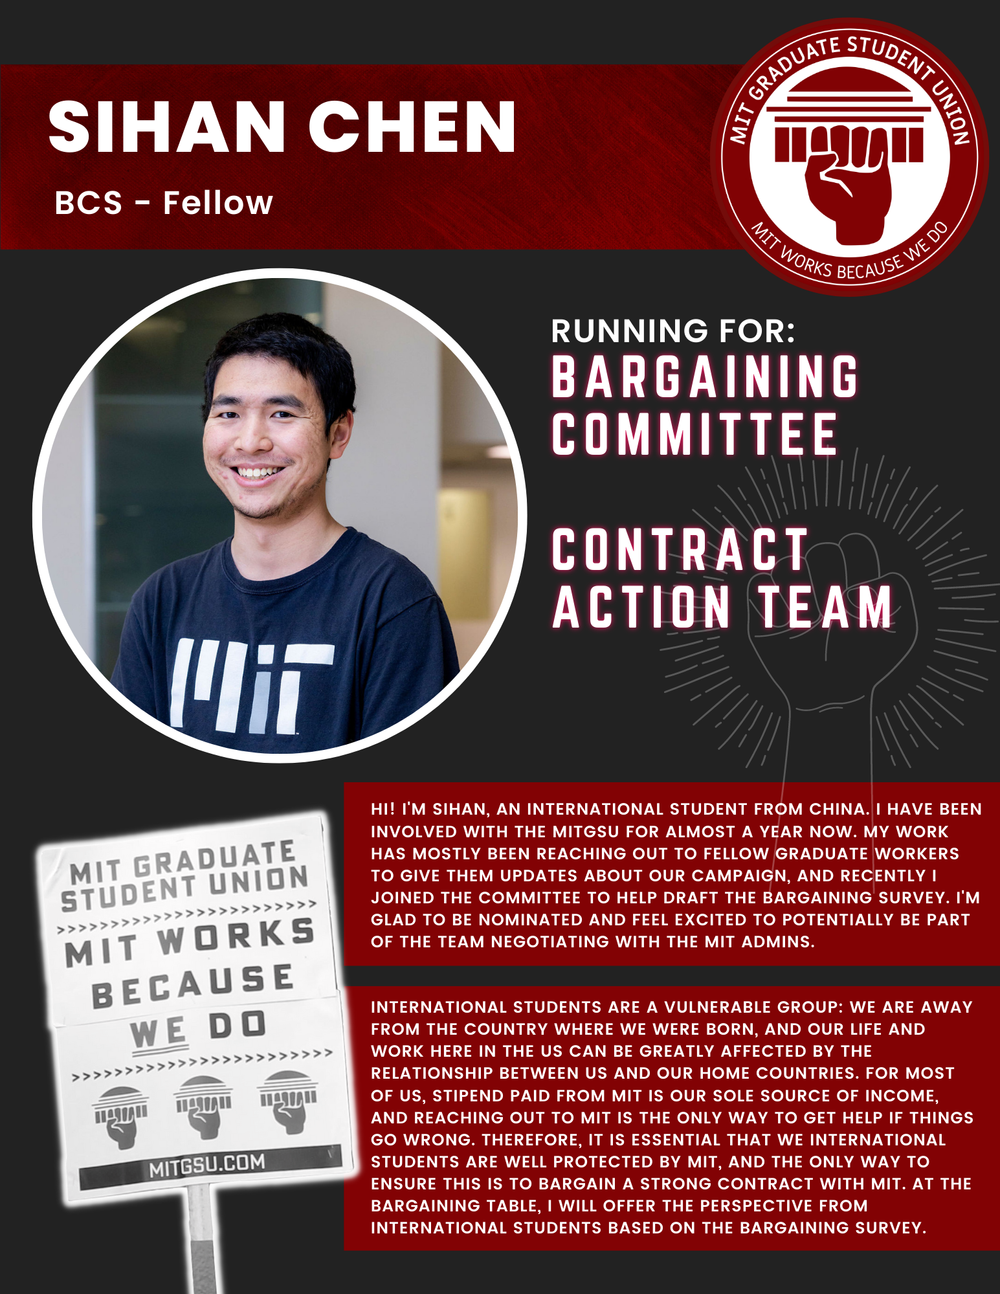  SIHAN CHEN BCS - Fellow   RUNNING FOR:  Bargaining Committee  Contract Action Team  HI! I'M SIHAN, AN INTERNATIONAL STUDENT FROM CHINA. I HAVE BEEN INVOLVED WITH THE MITGSU FOR ALMOST A YEAR NOW. MY WORK HAS MOSTLY BEEN REACHING OUT TO FELLOW GRADUA